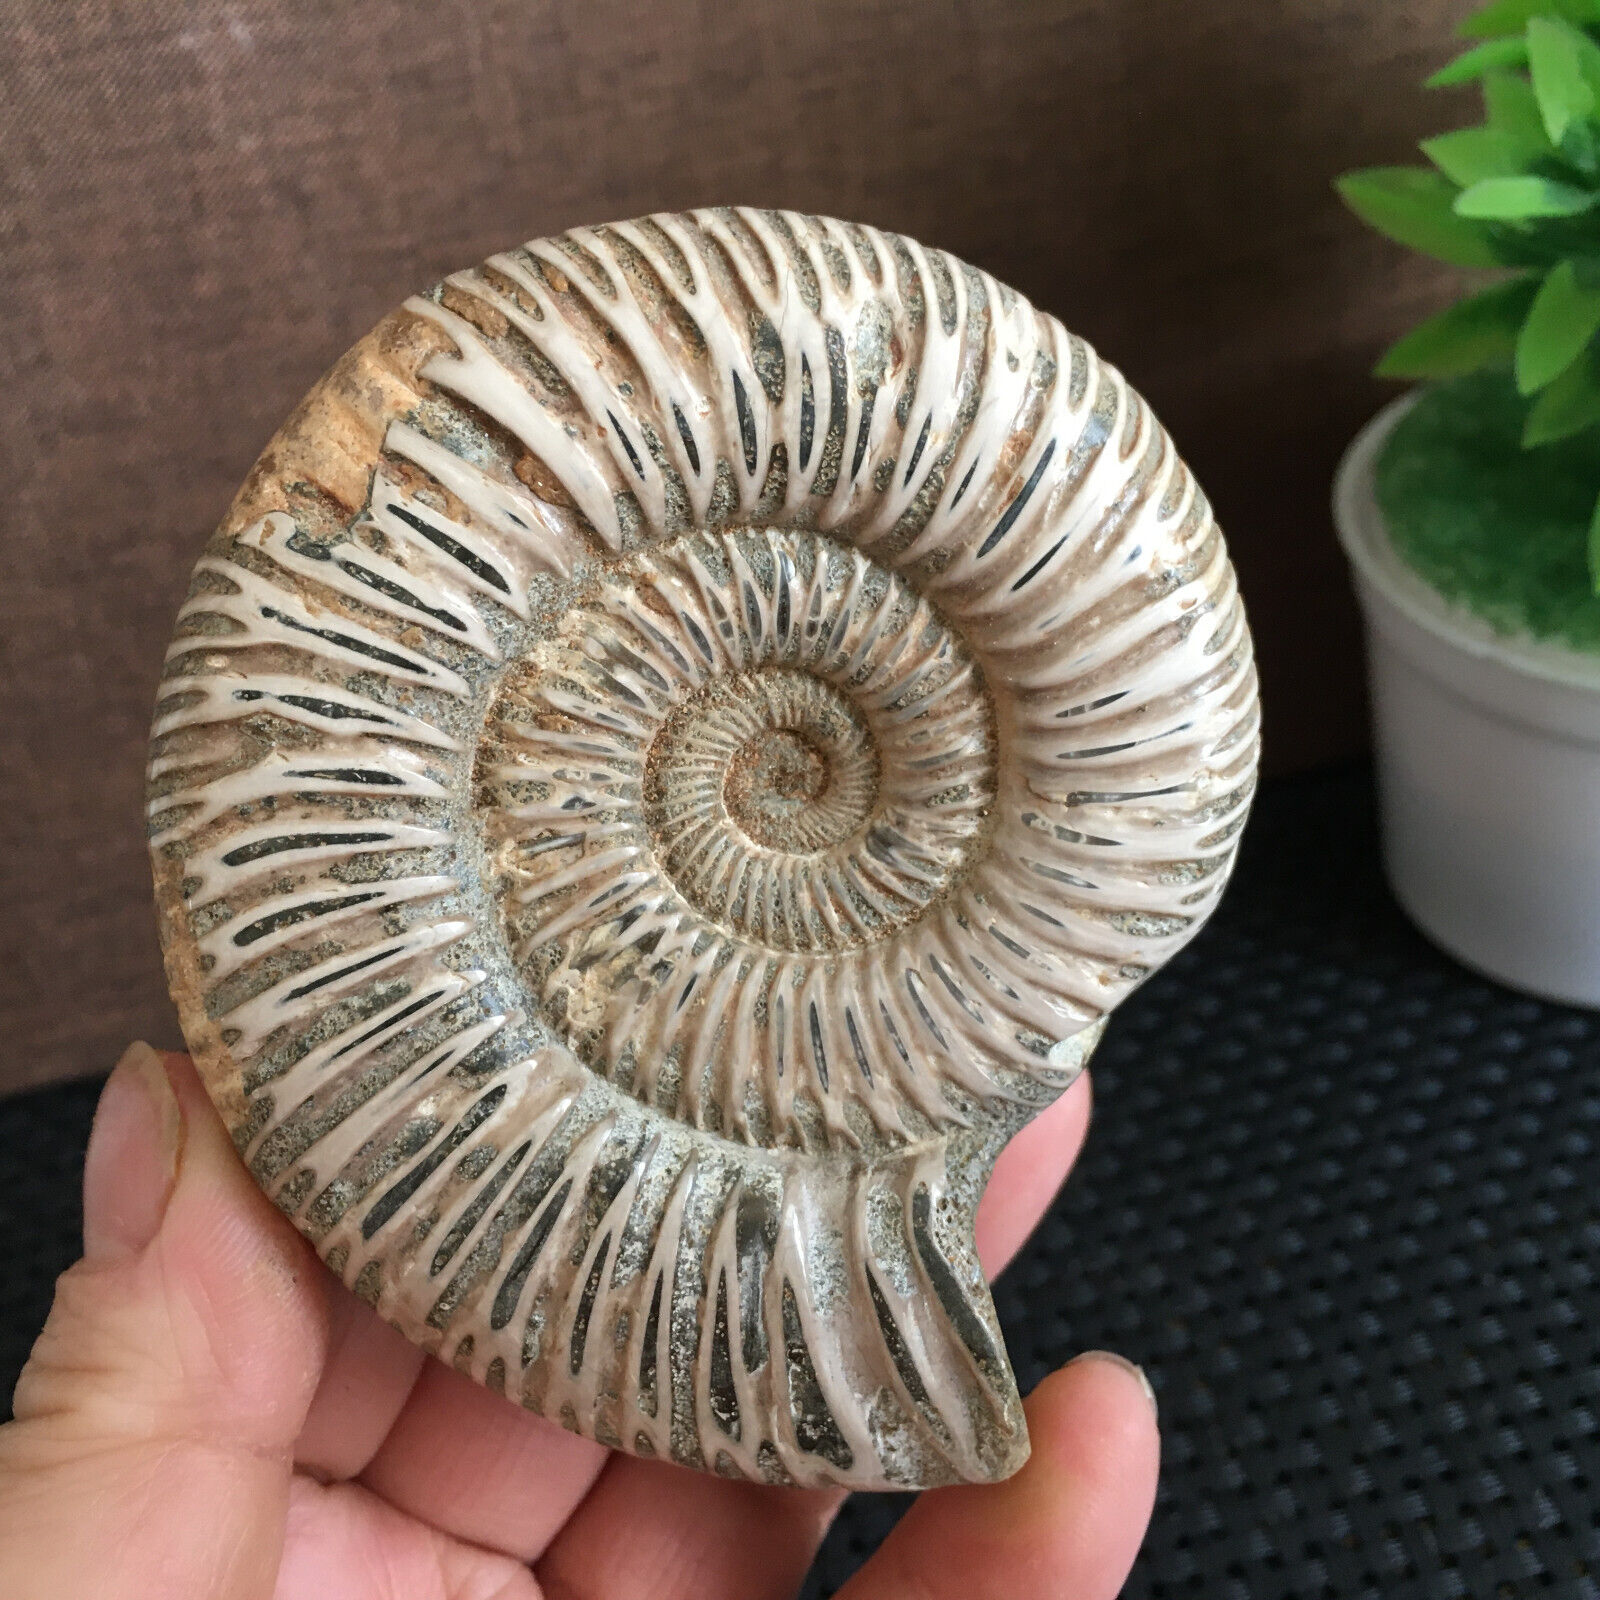 193g Rare natural rough polished white conch fossil Ammonite  md546